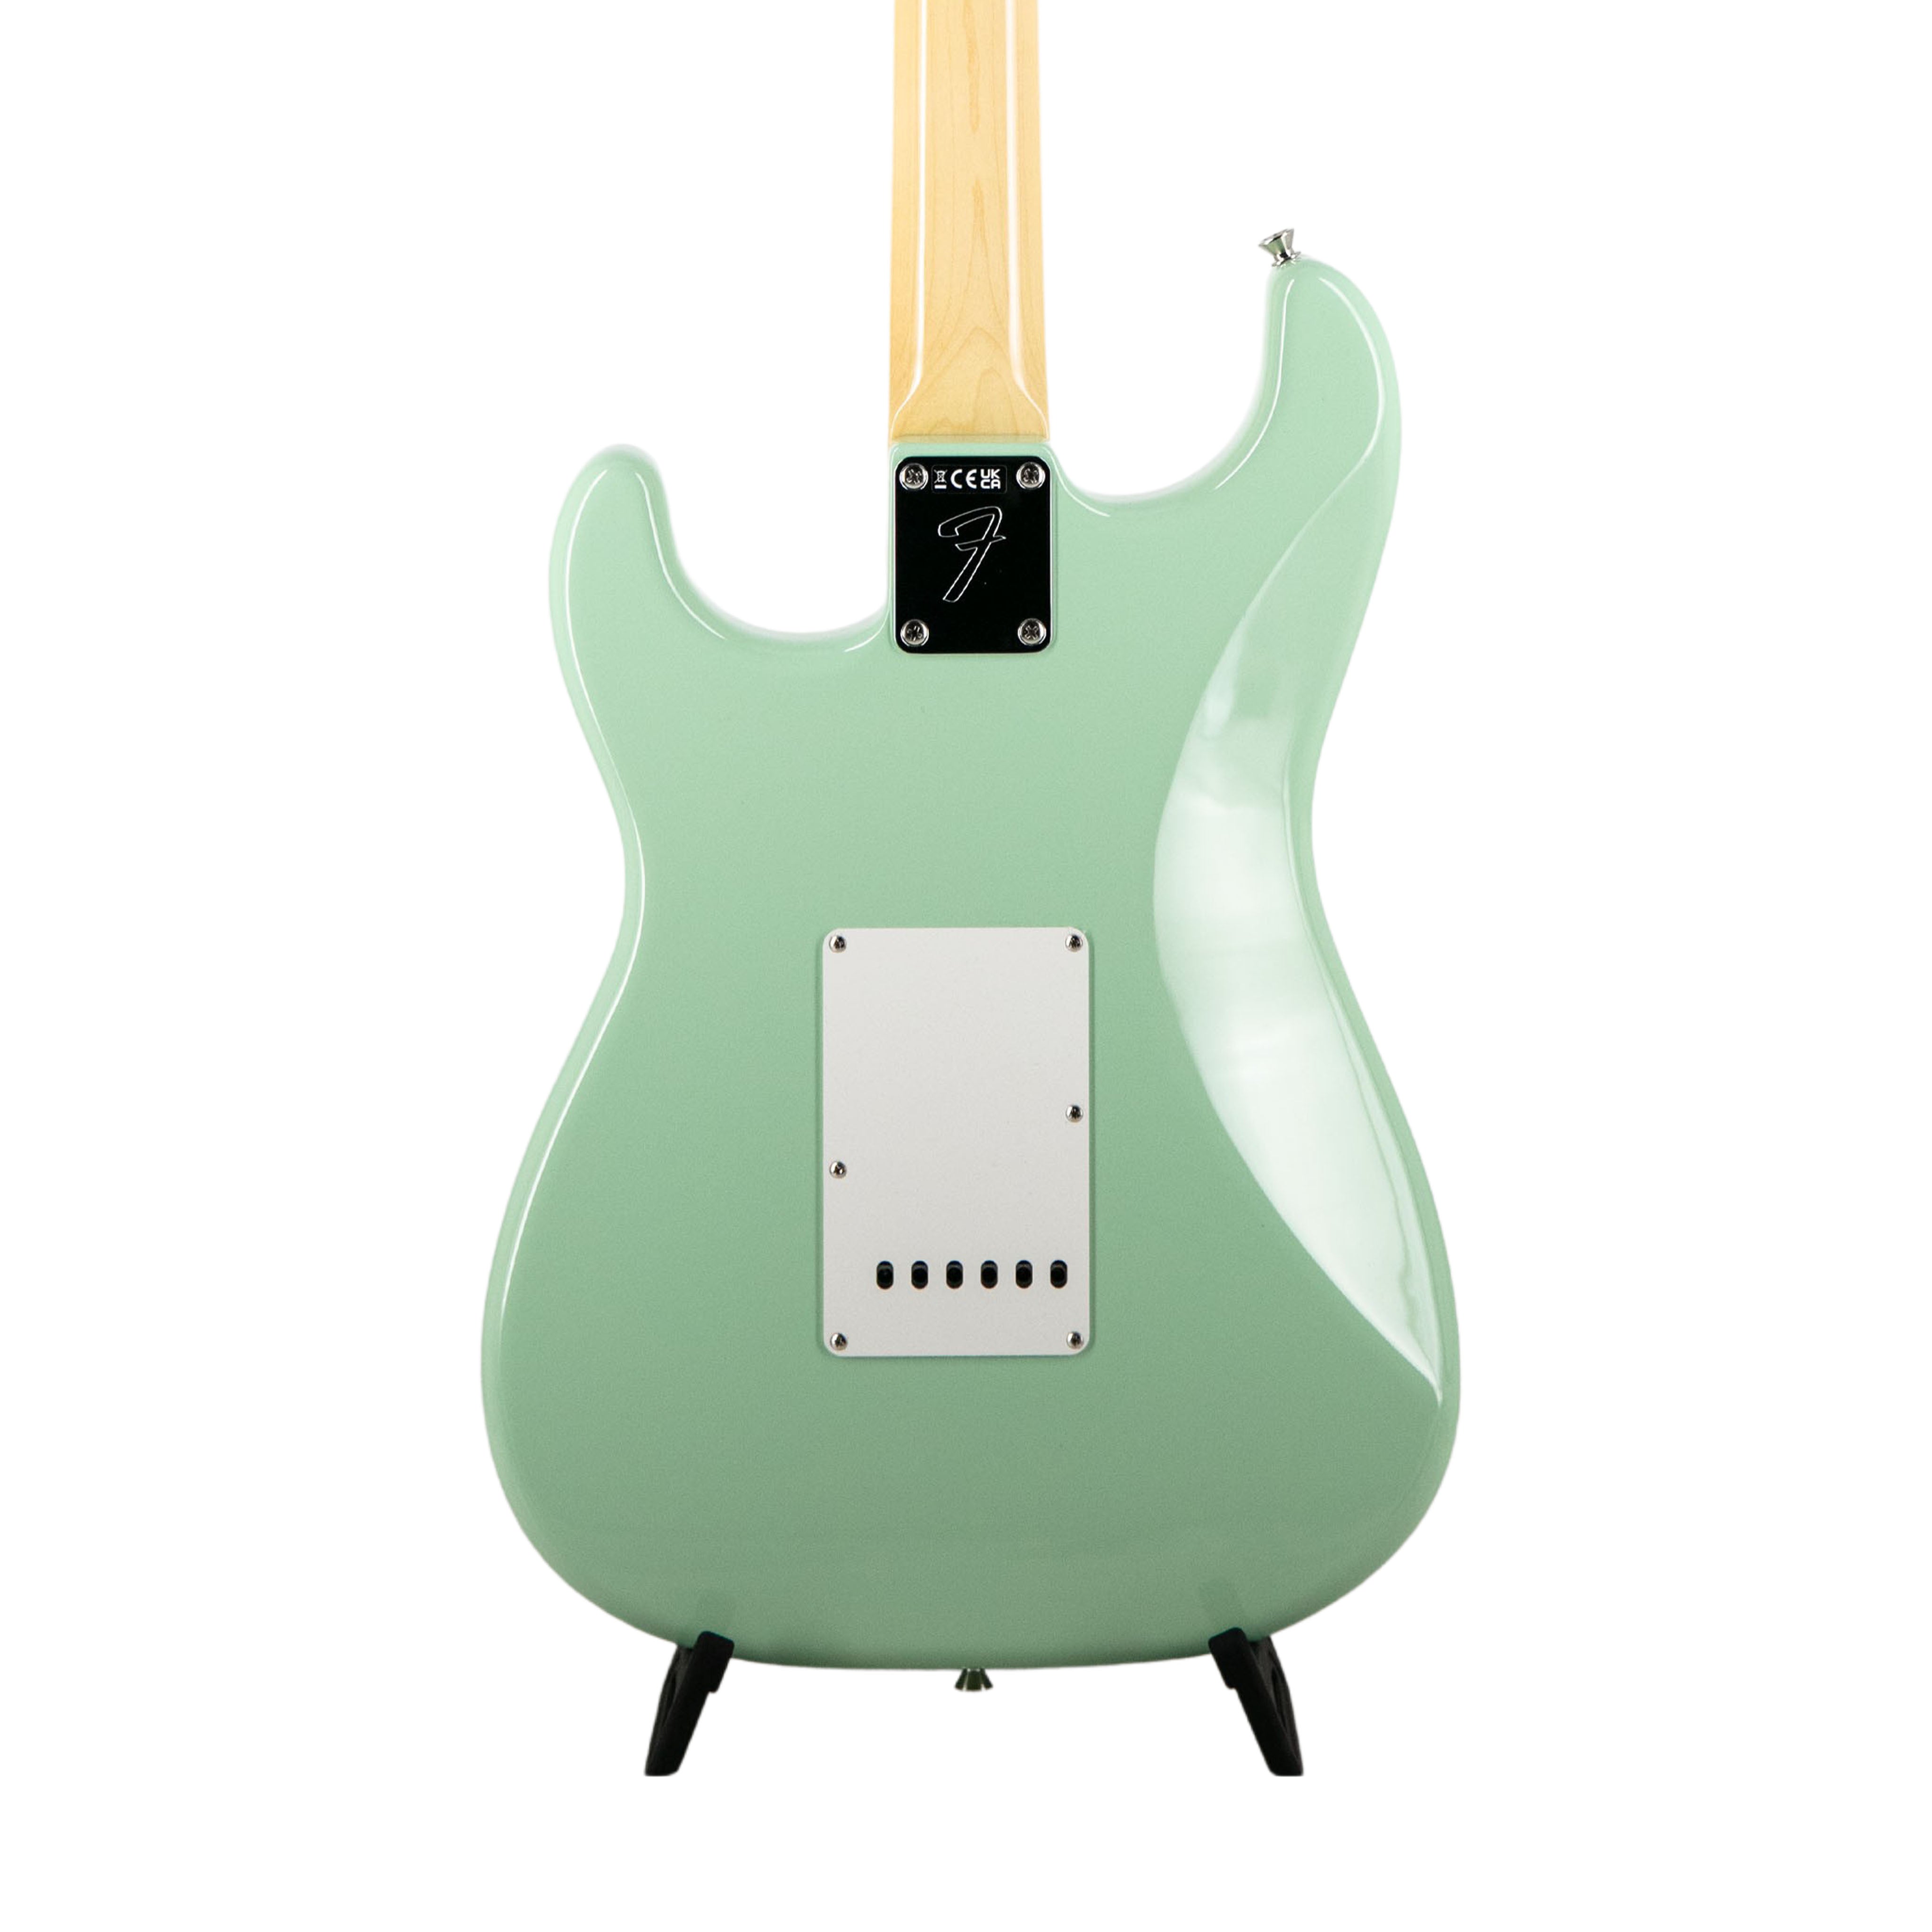 Fender FSR Collection Traditional Late 60s Stratocaster Electric Guitar, RW FB, Surf Green